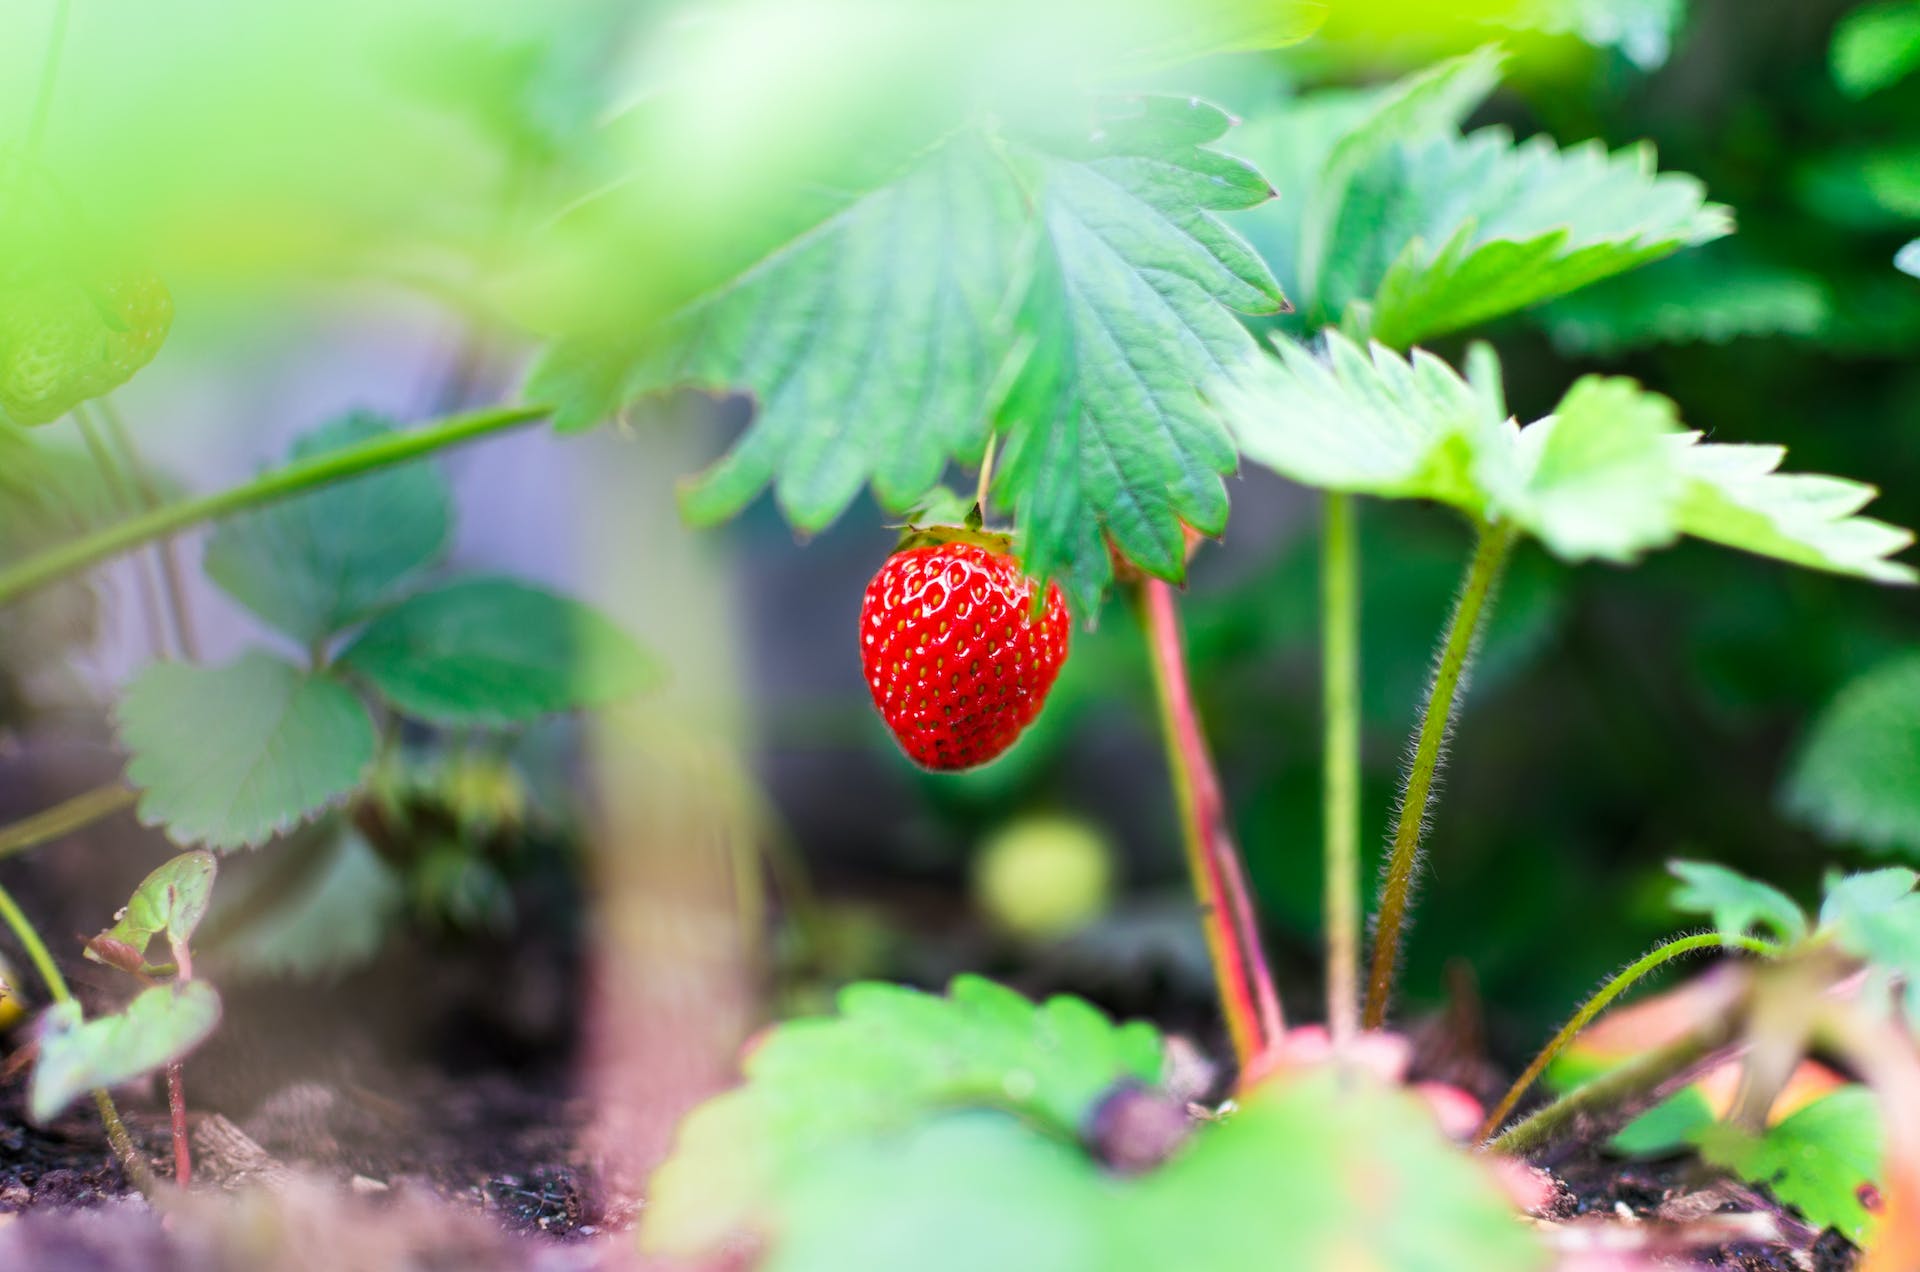 Mini guide to grow strawberries in the city